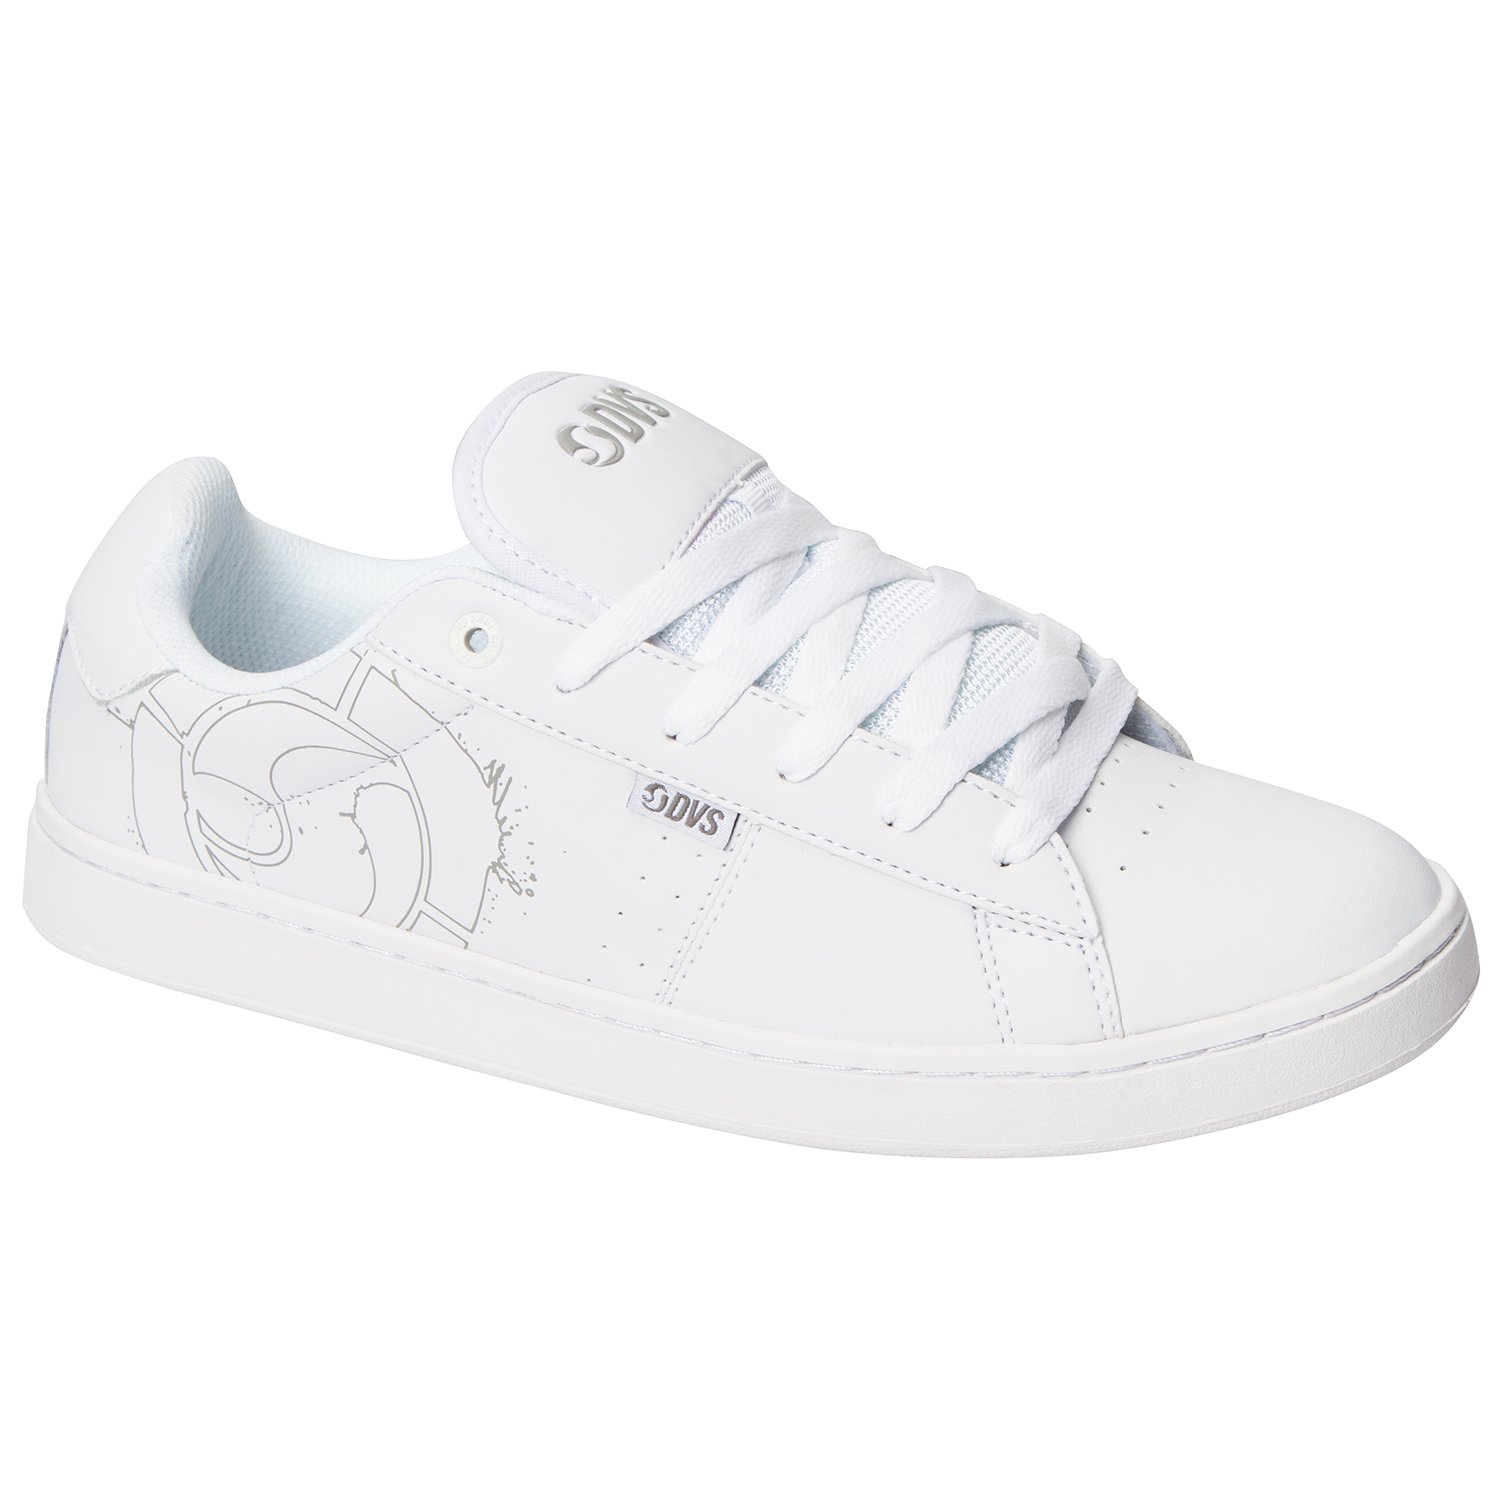 DVS Shoes Revival 2 White Leather